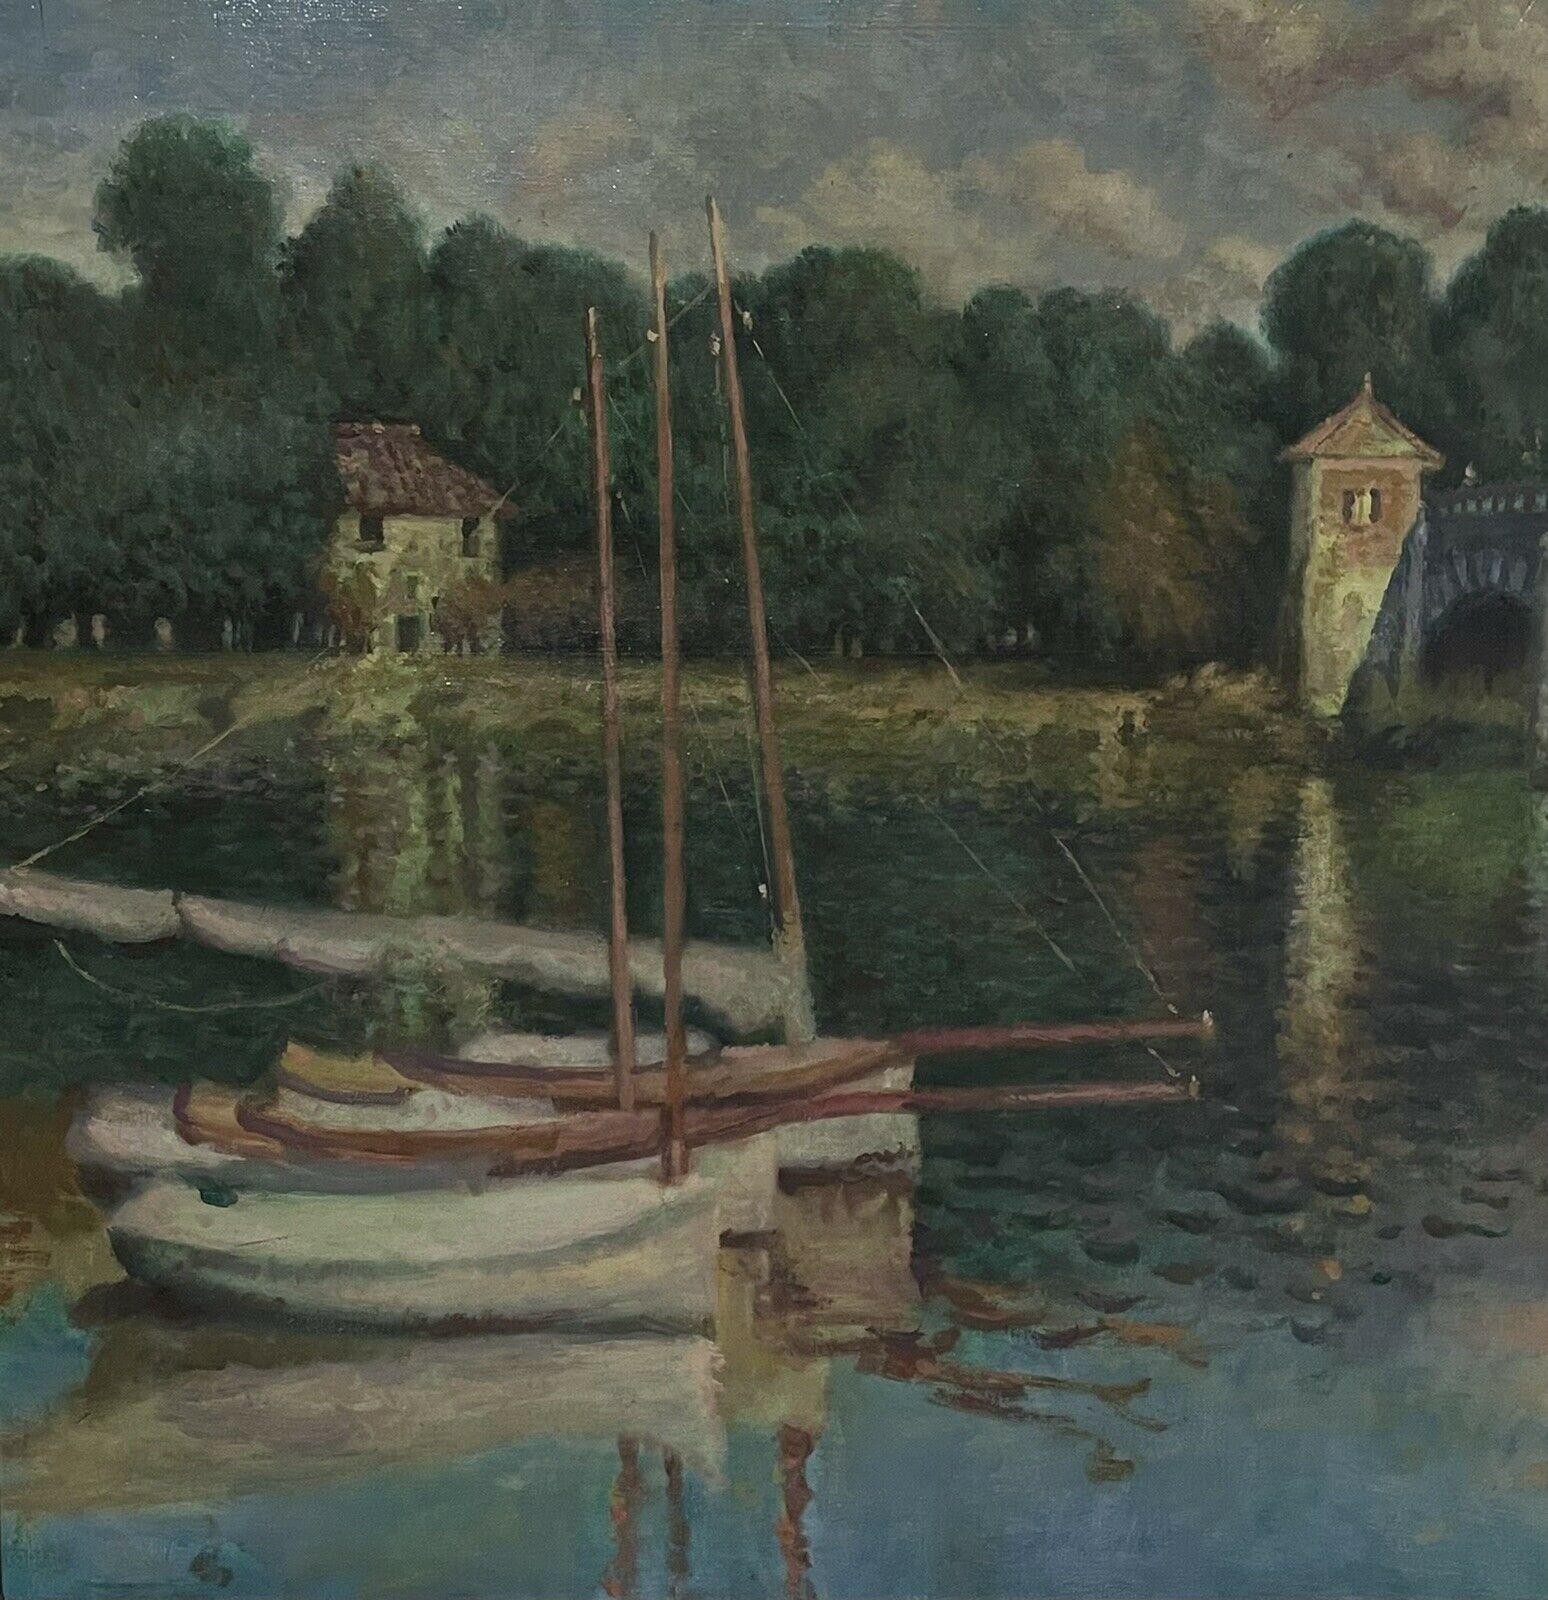 Artist/ School: after Claude Monet

Title: The Bridge at Argenteuil

Medium: oil painting on canvas, framed and inscribed verso.

framed: 26.25 x 30.25 inches
canvas:  20 x 24 inches

Provenance: private collection, England

Condition: The painting